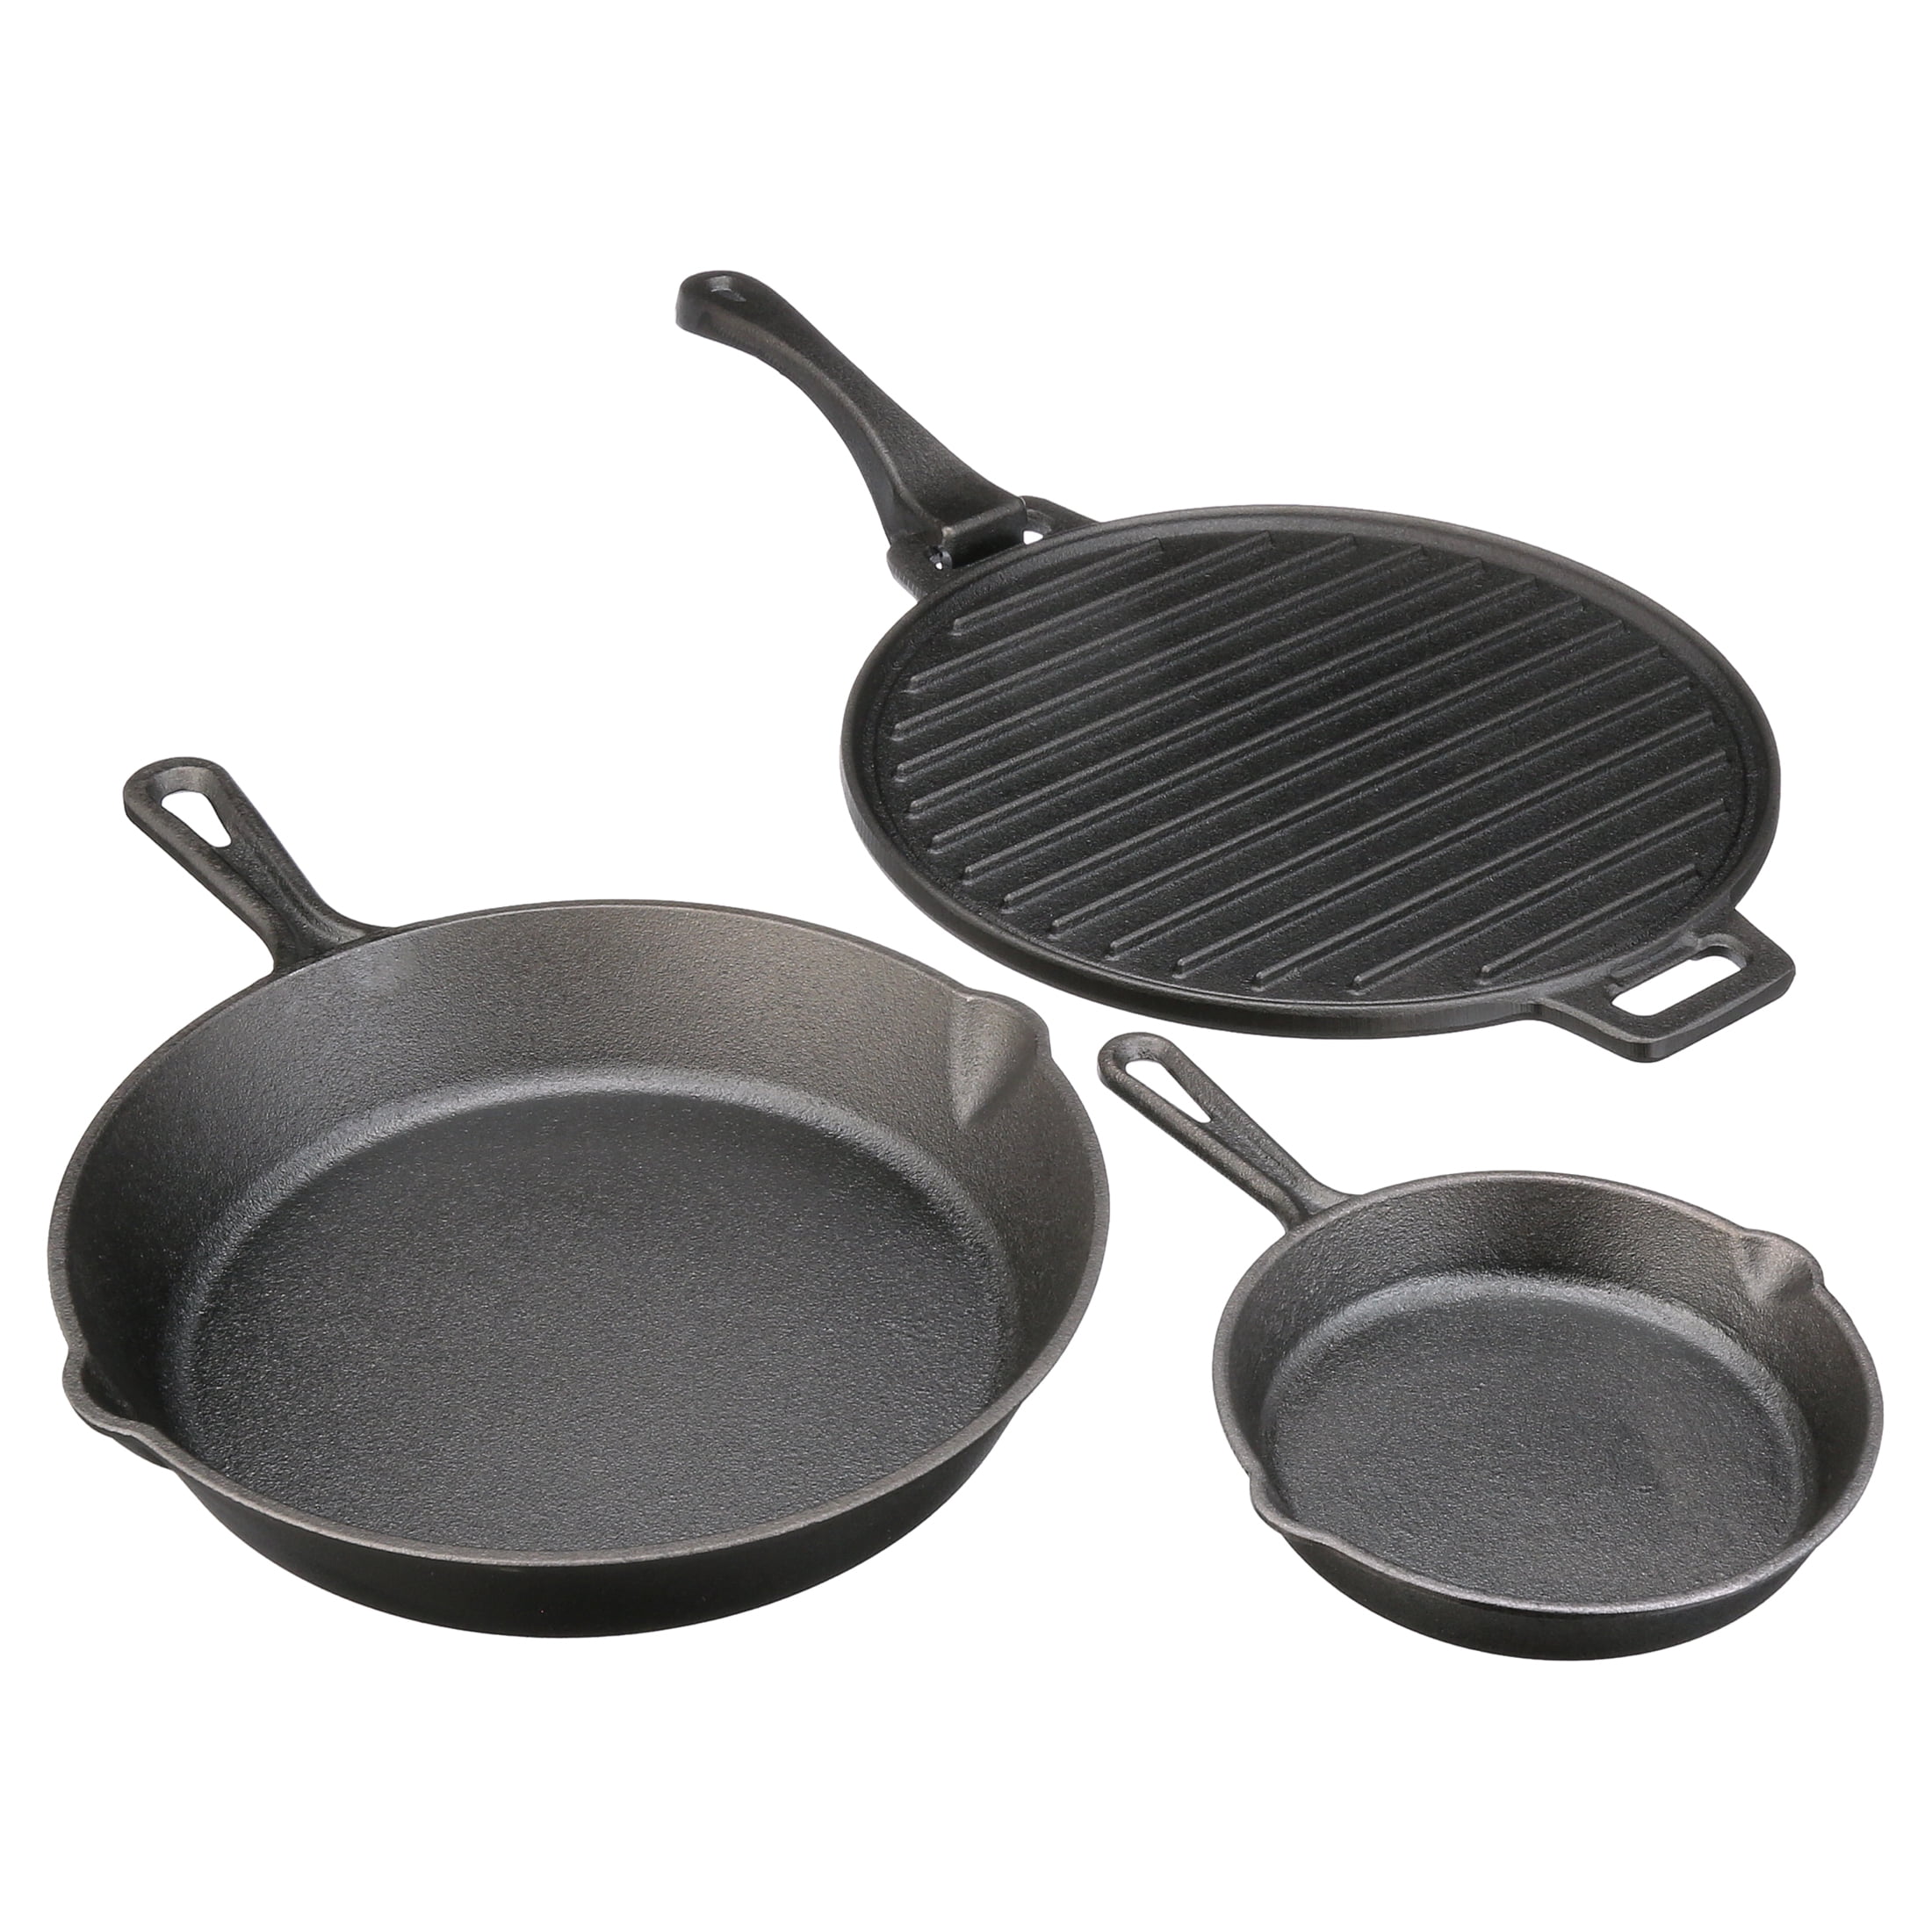 Ozark Trail 4-Piece Cast Iron Skillet Set with Handles and Griddle, Pre-Seasoned, 6 inch, 10.5 inch, 11 inch